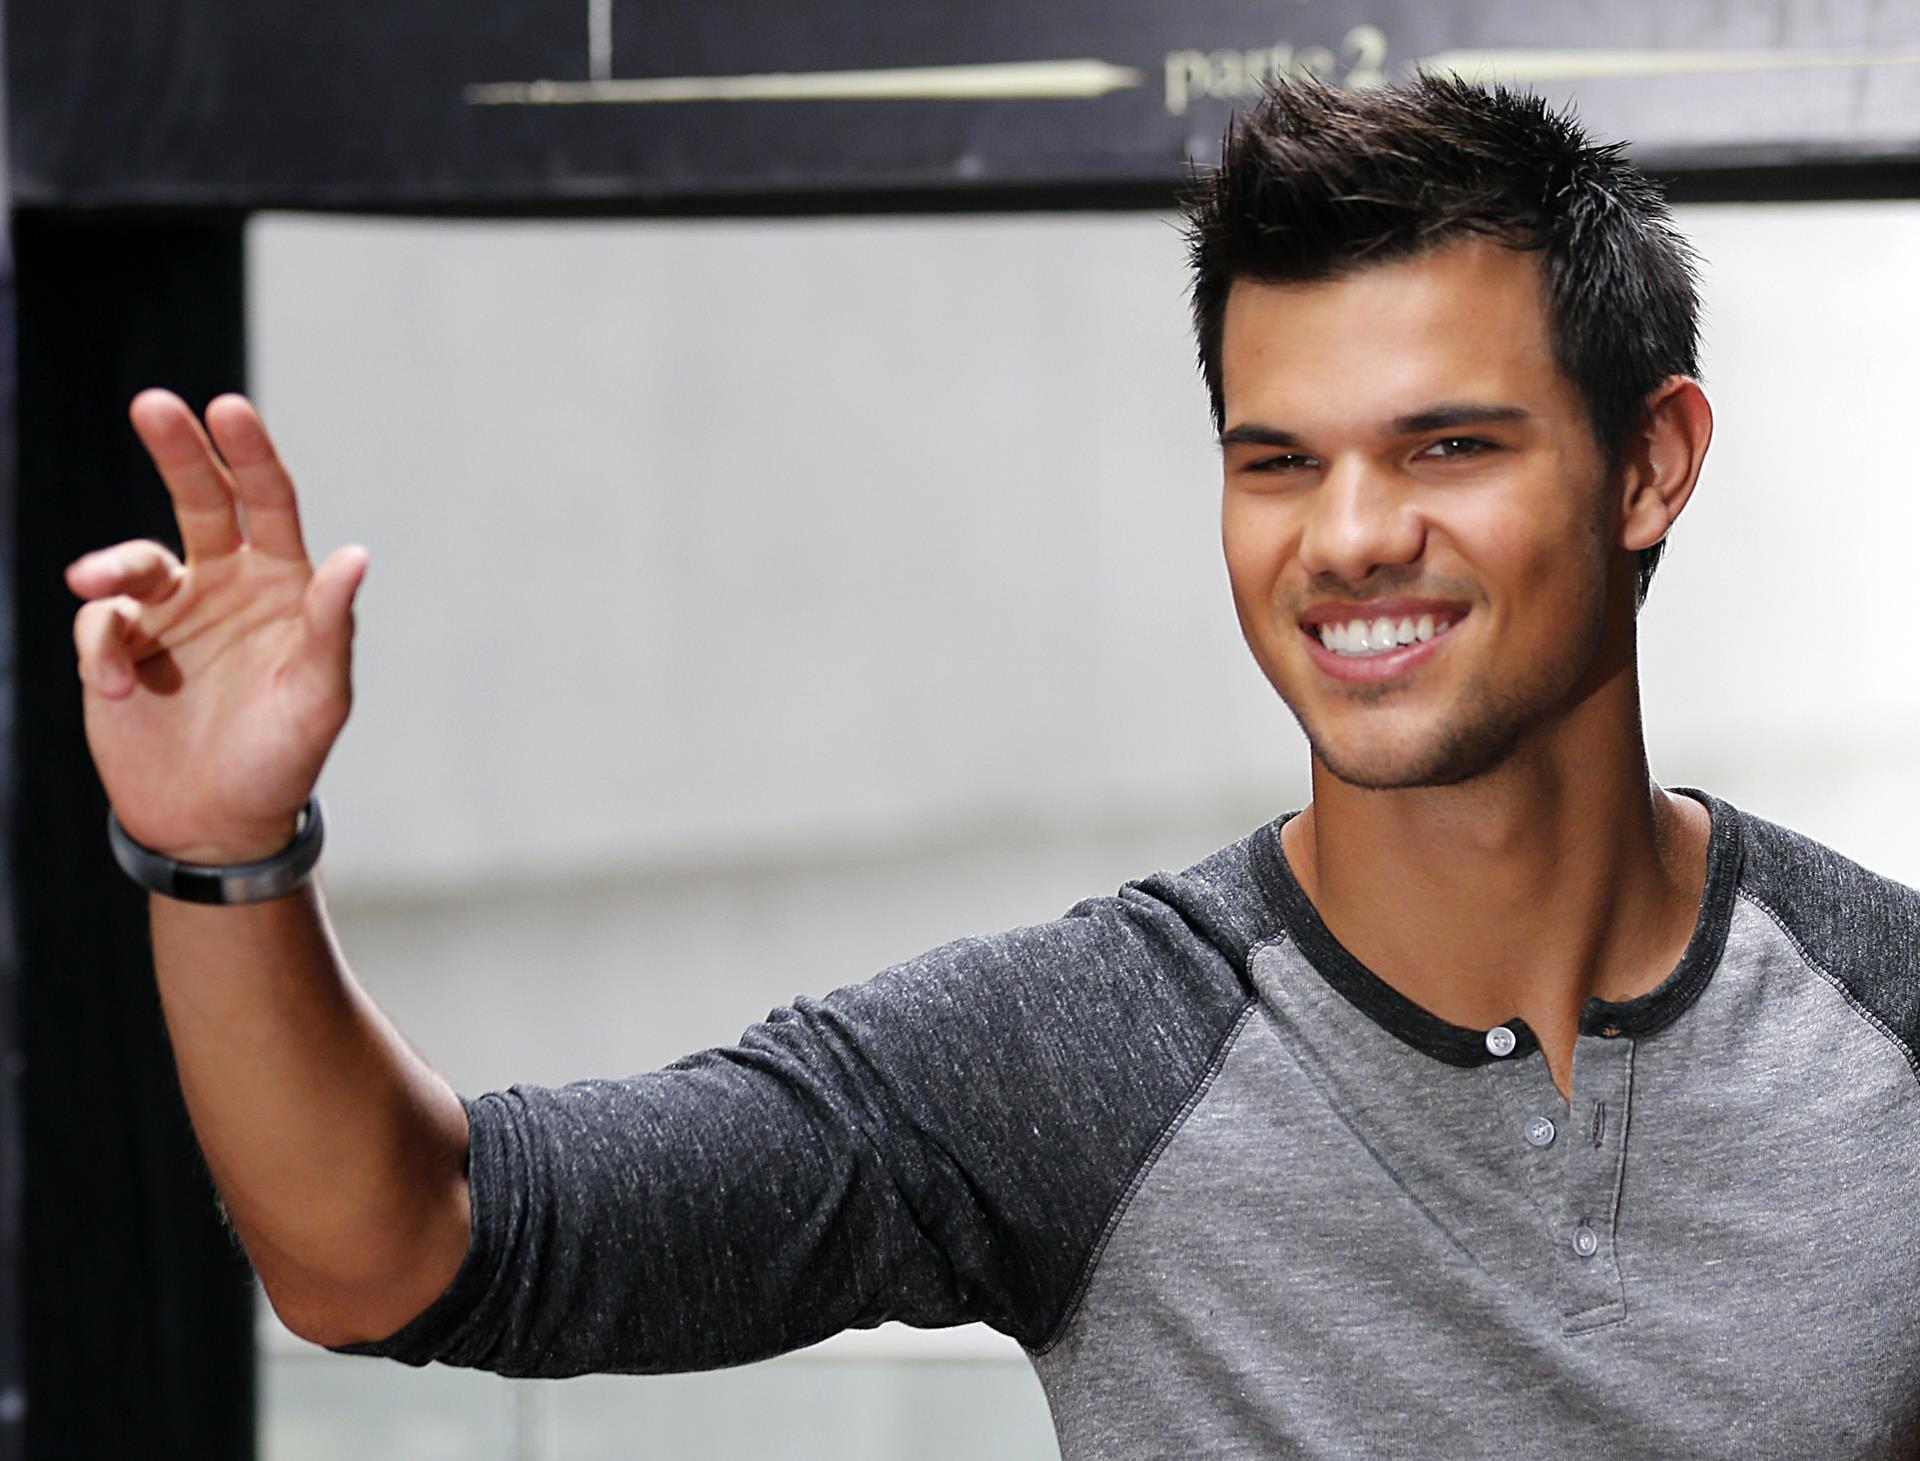 Free Download Hottest Taylor Lautner Shirtless Picture Poll Results Hottest